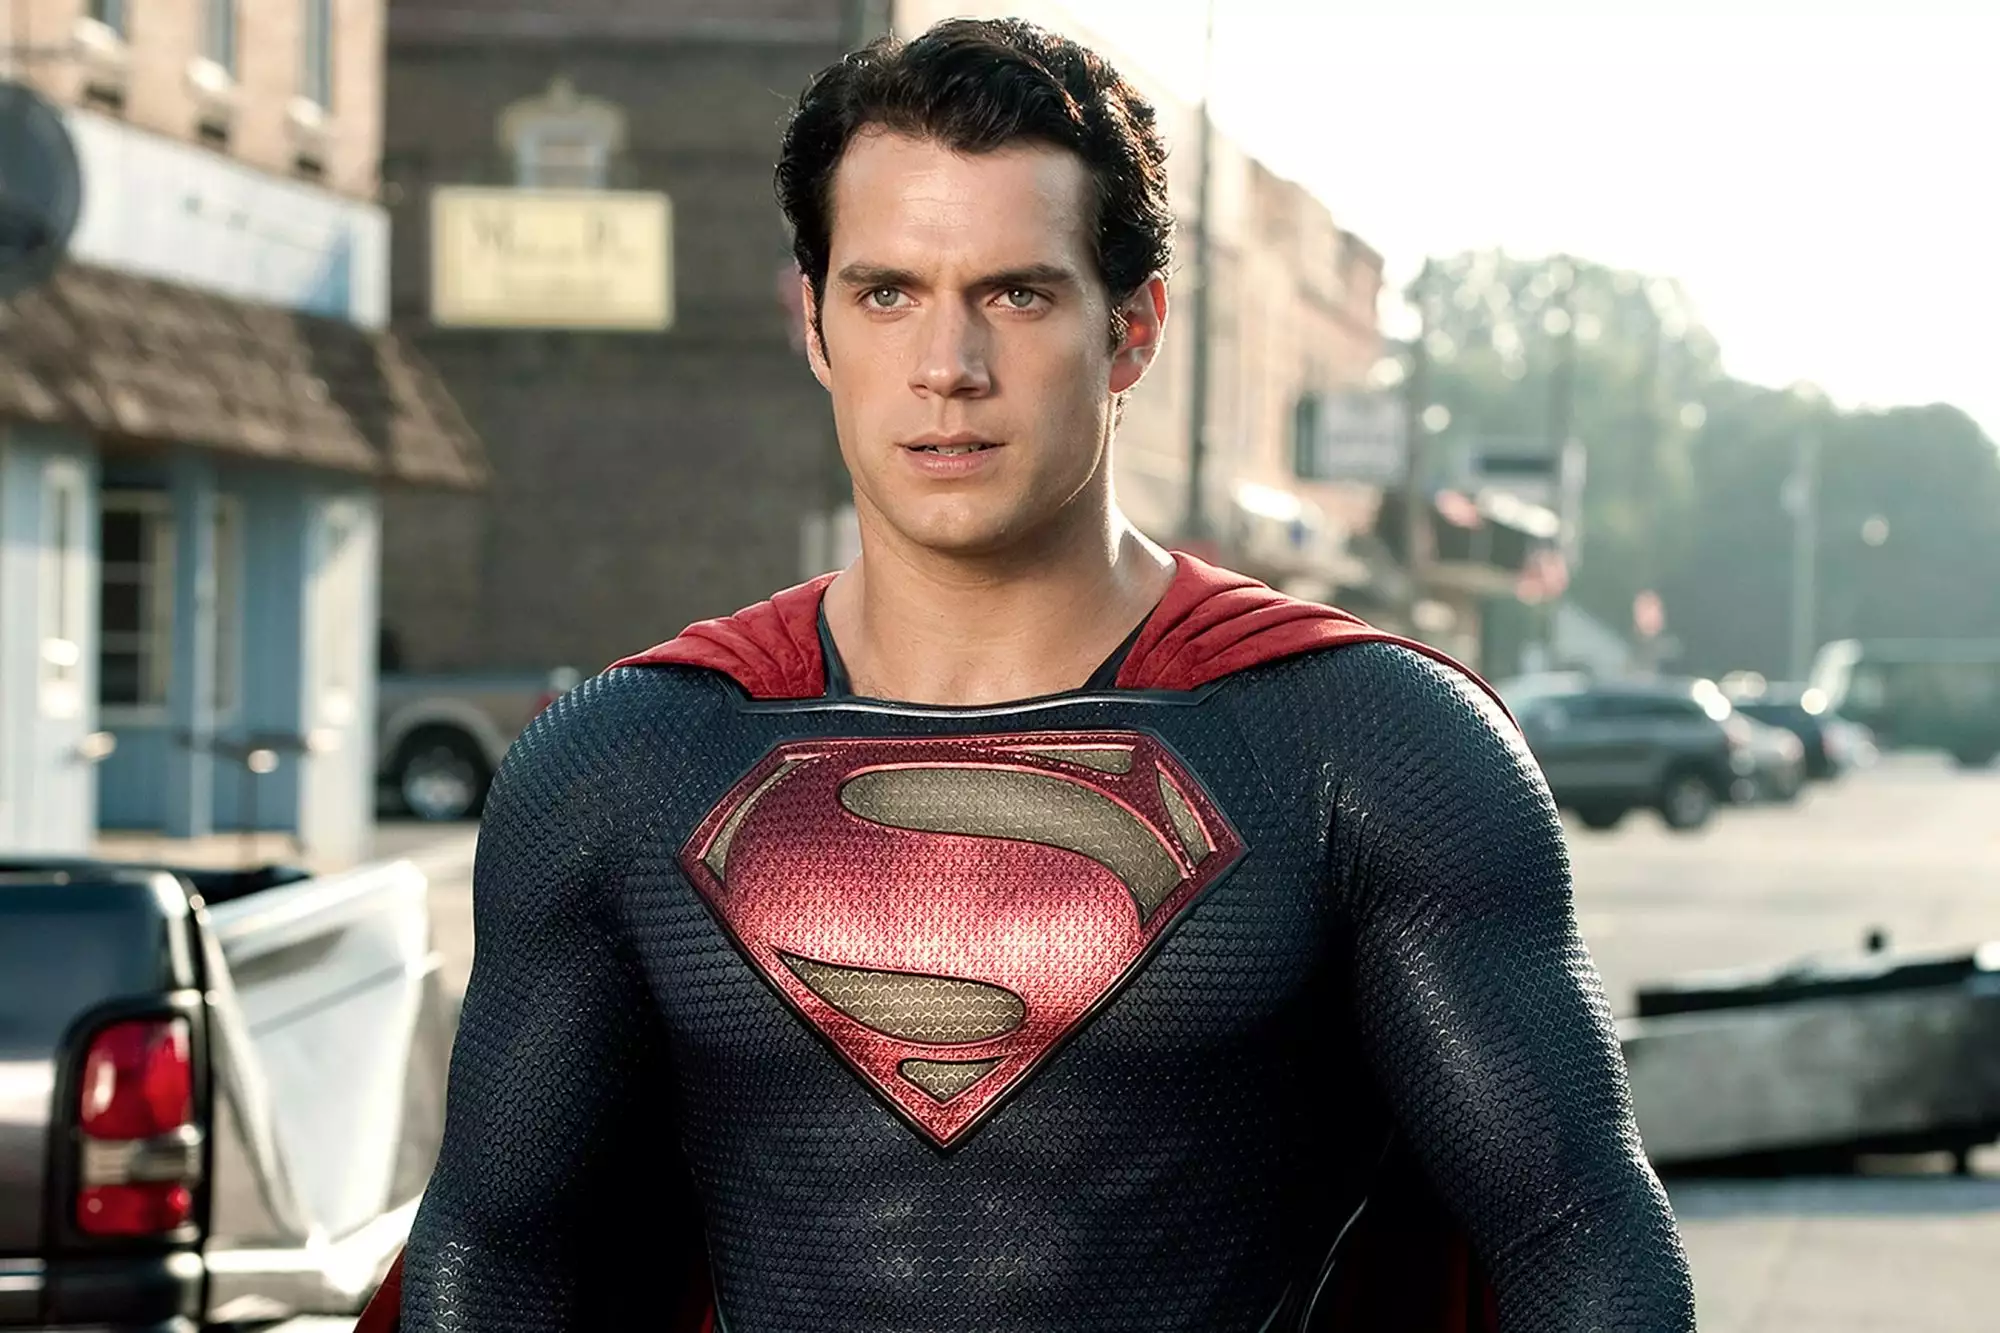 Henry Cavill is in a Superman suit and is looking into the distance.